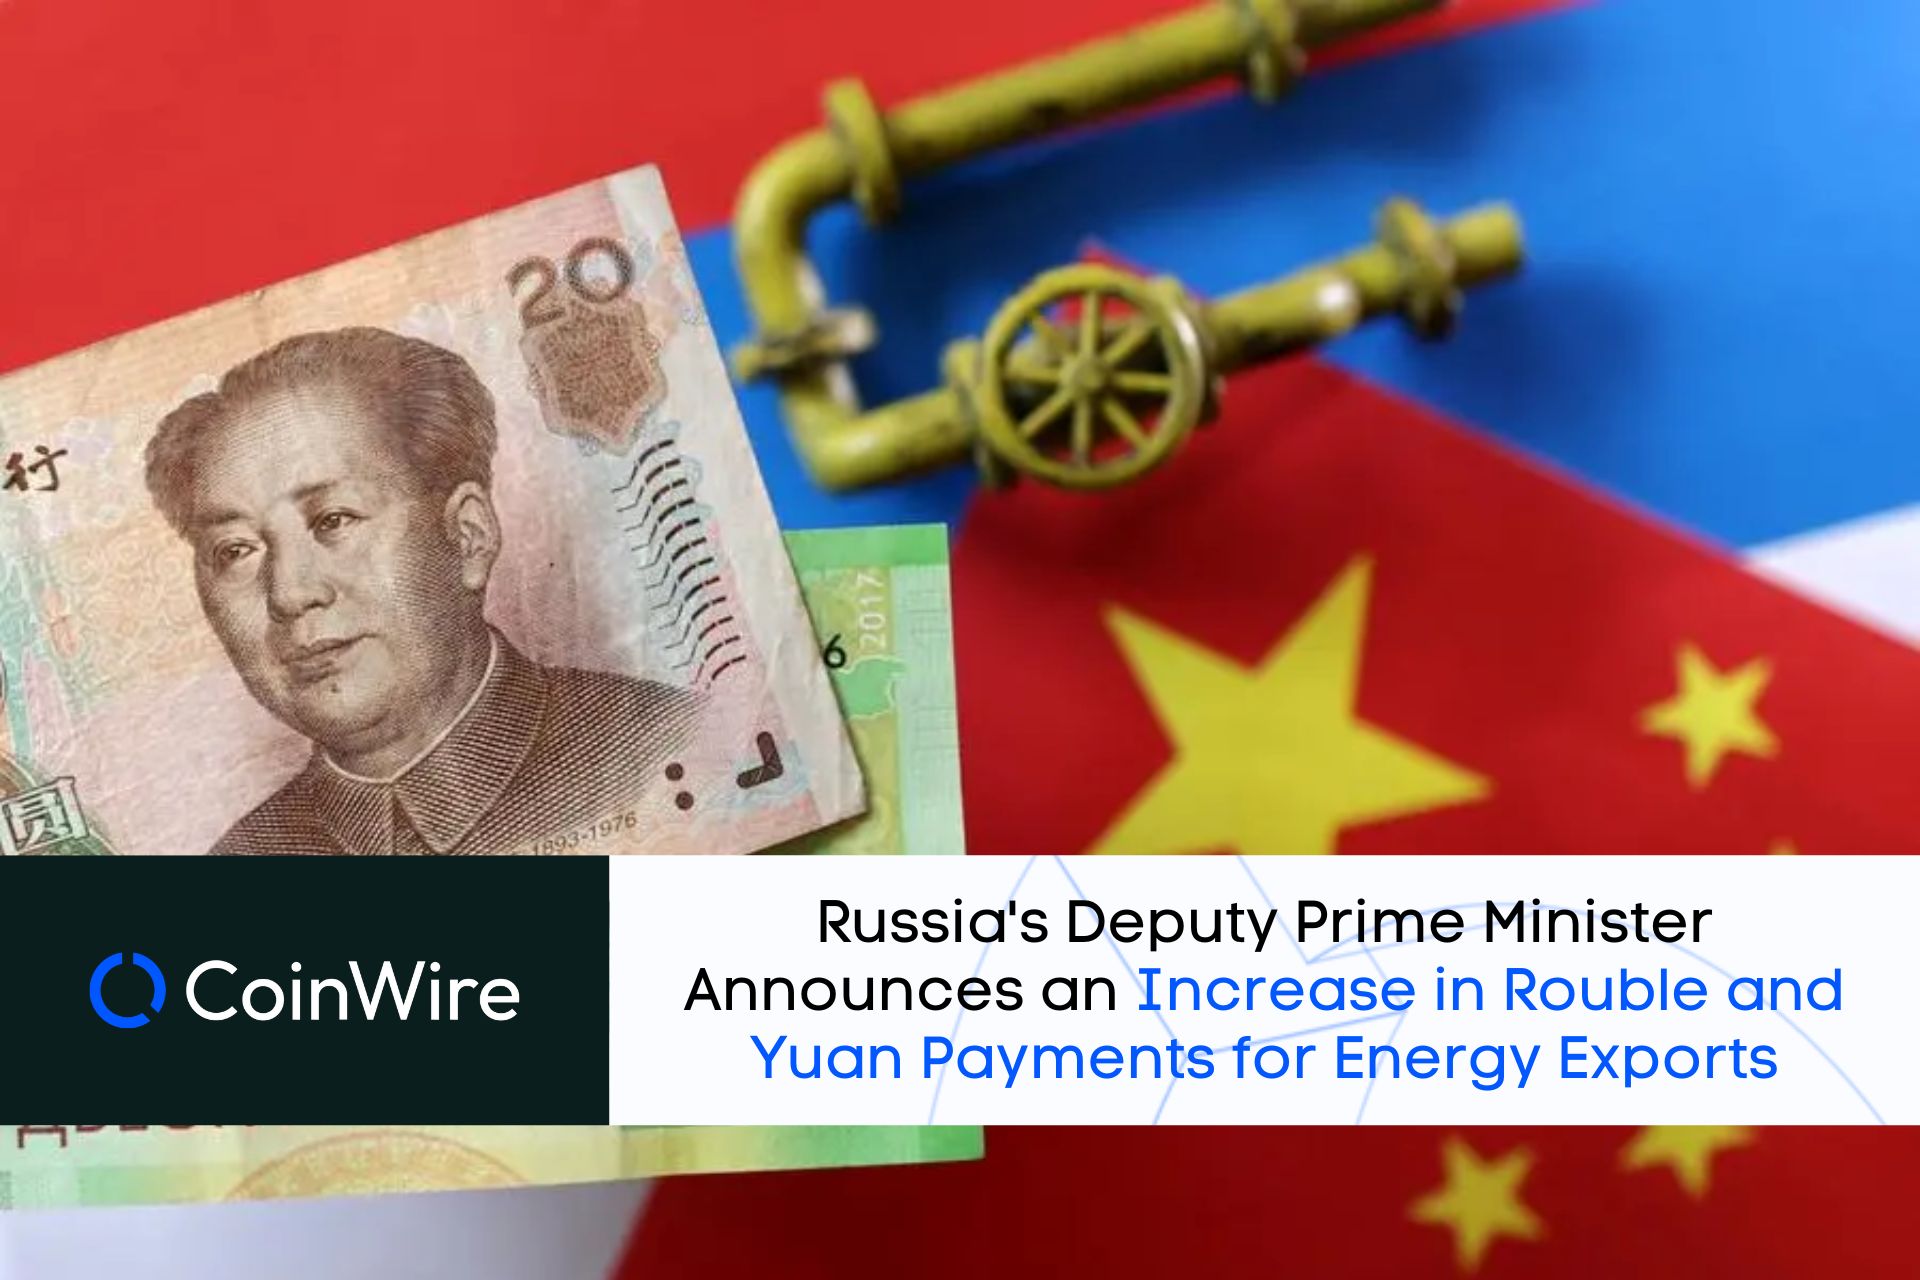 Russia Announces An Increase In Rouble And Yuan Payments For Energy Exports